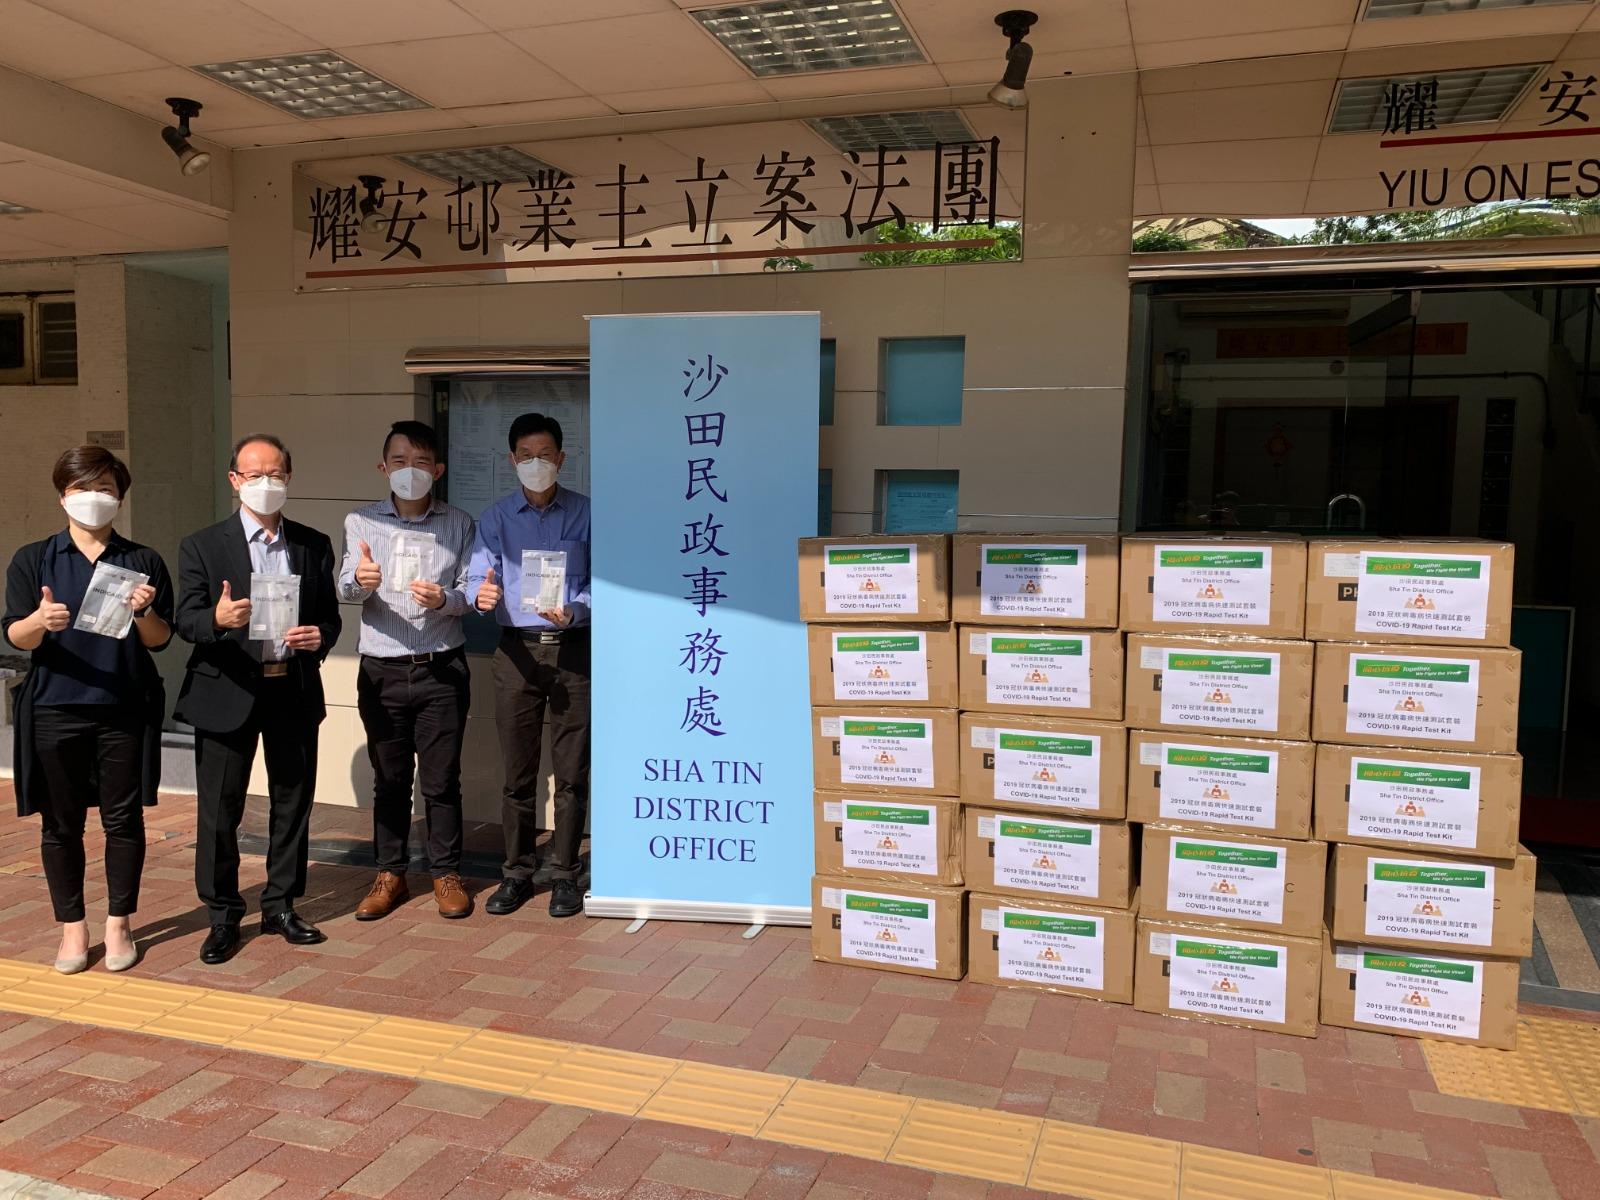 The Sha Tin District Office today (May 21) distributed COVID-19 rapid test kits to households, cleansing workers and property management staff living and working in Yiu On Estate for voluntary testing through the property management company and the owners' corporation.